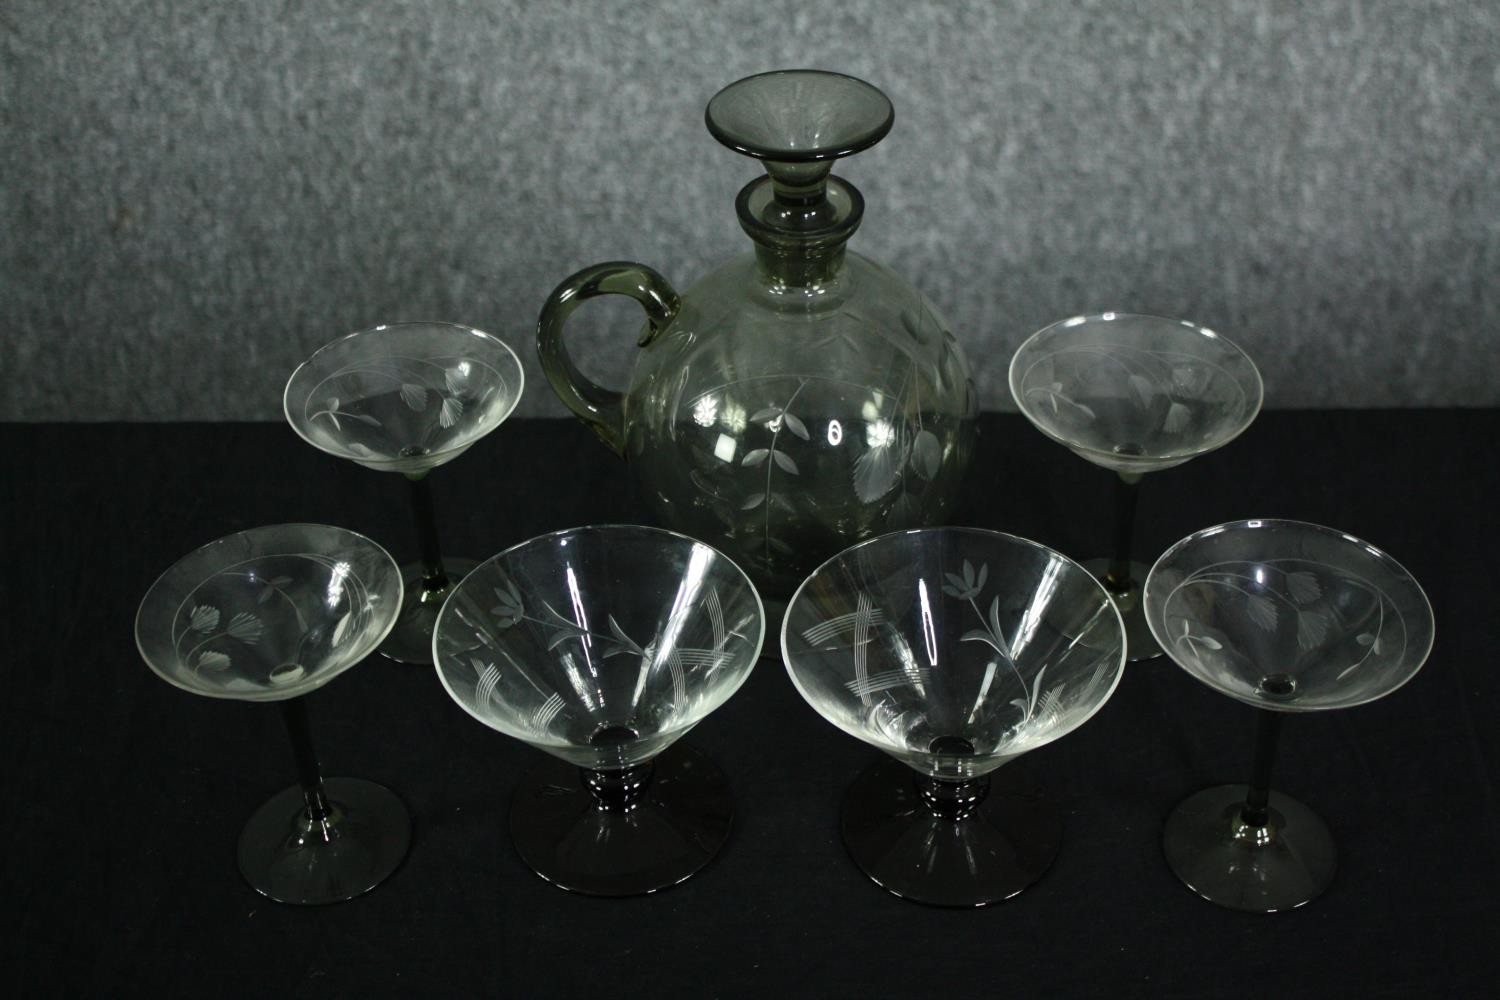 A Swedish smokey etched glass spherical decanter with conical stopper and four matching glasses